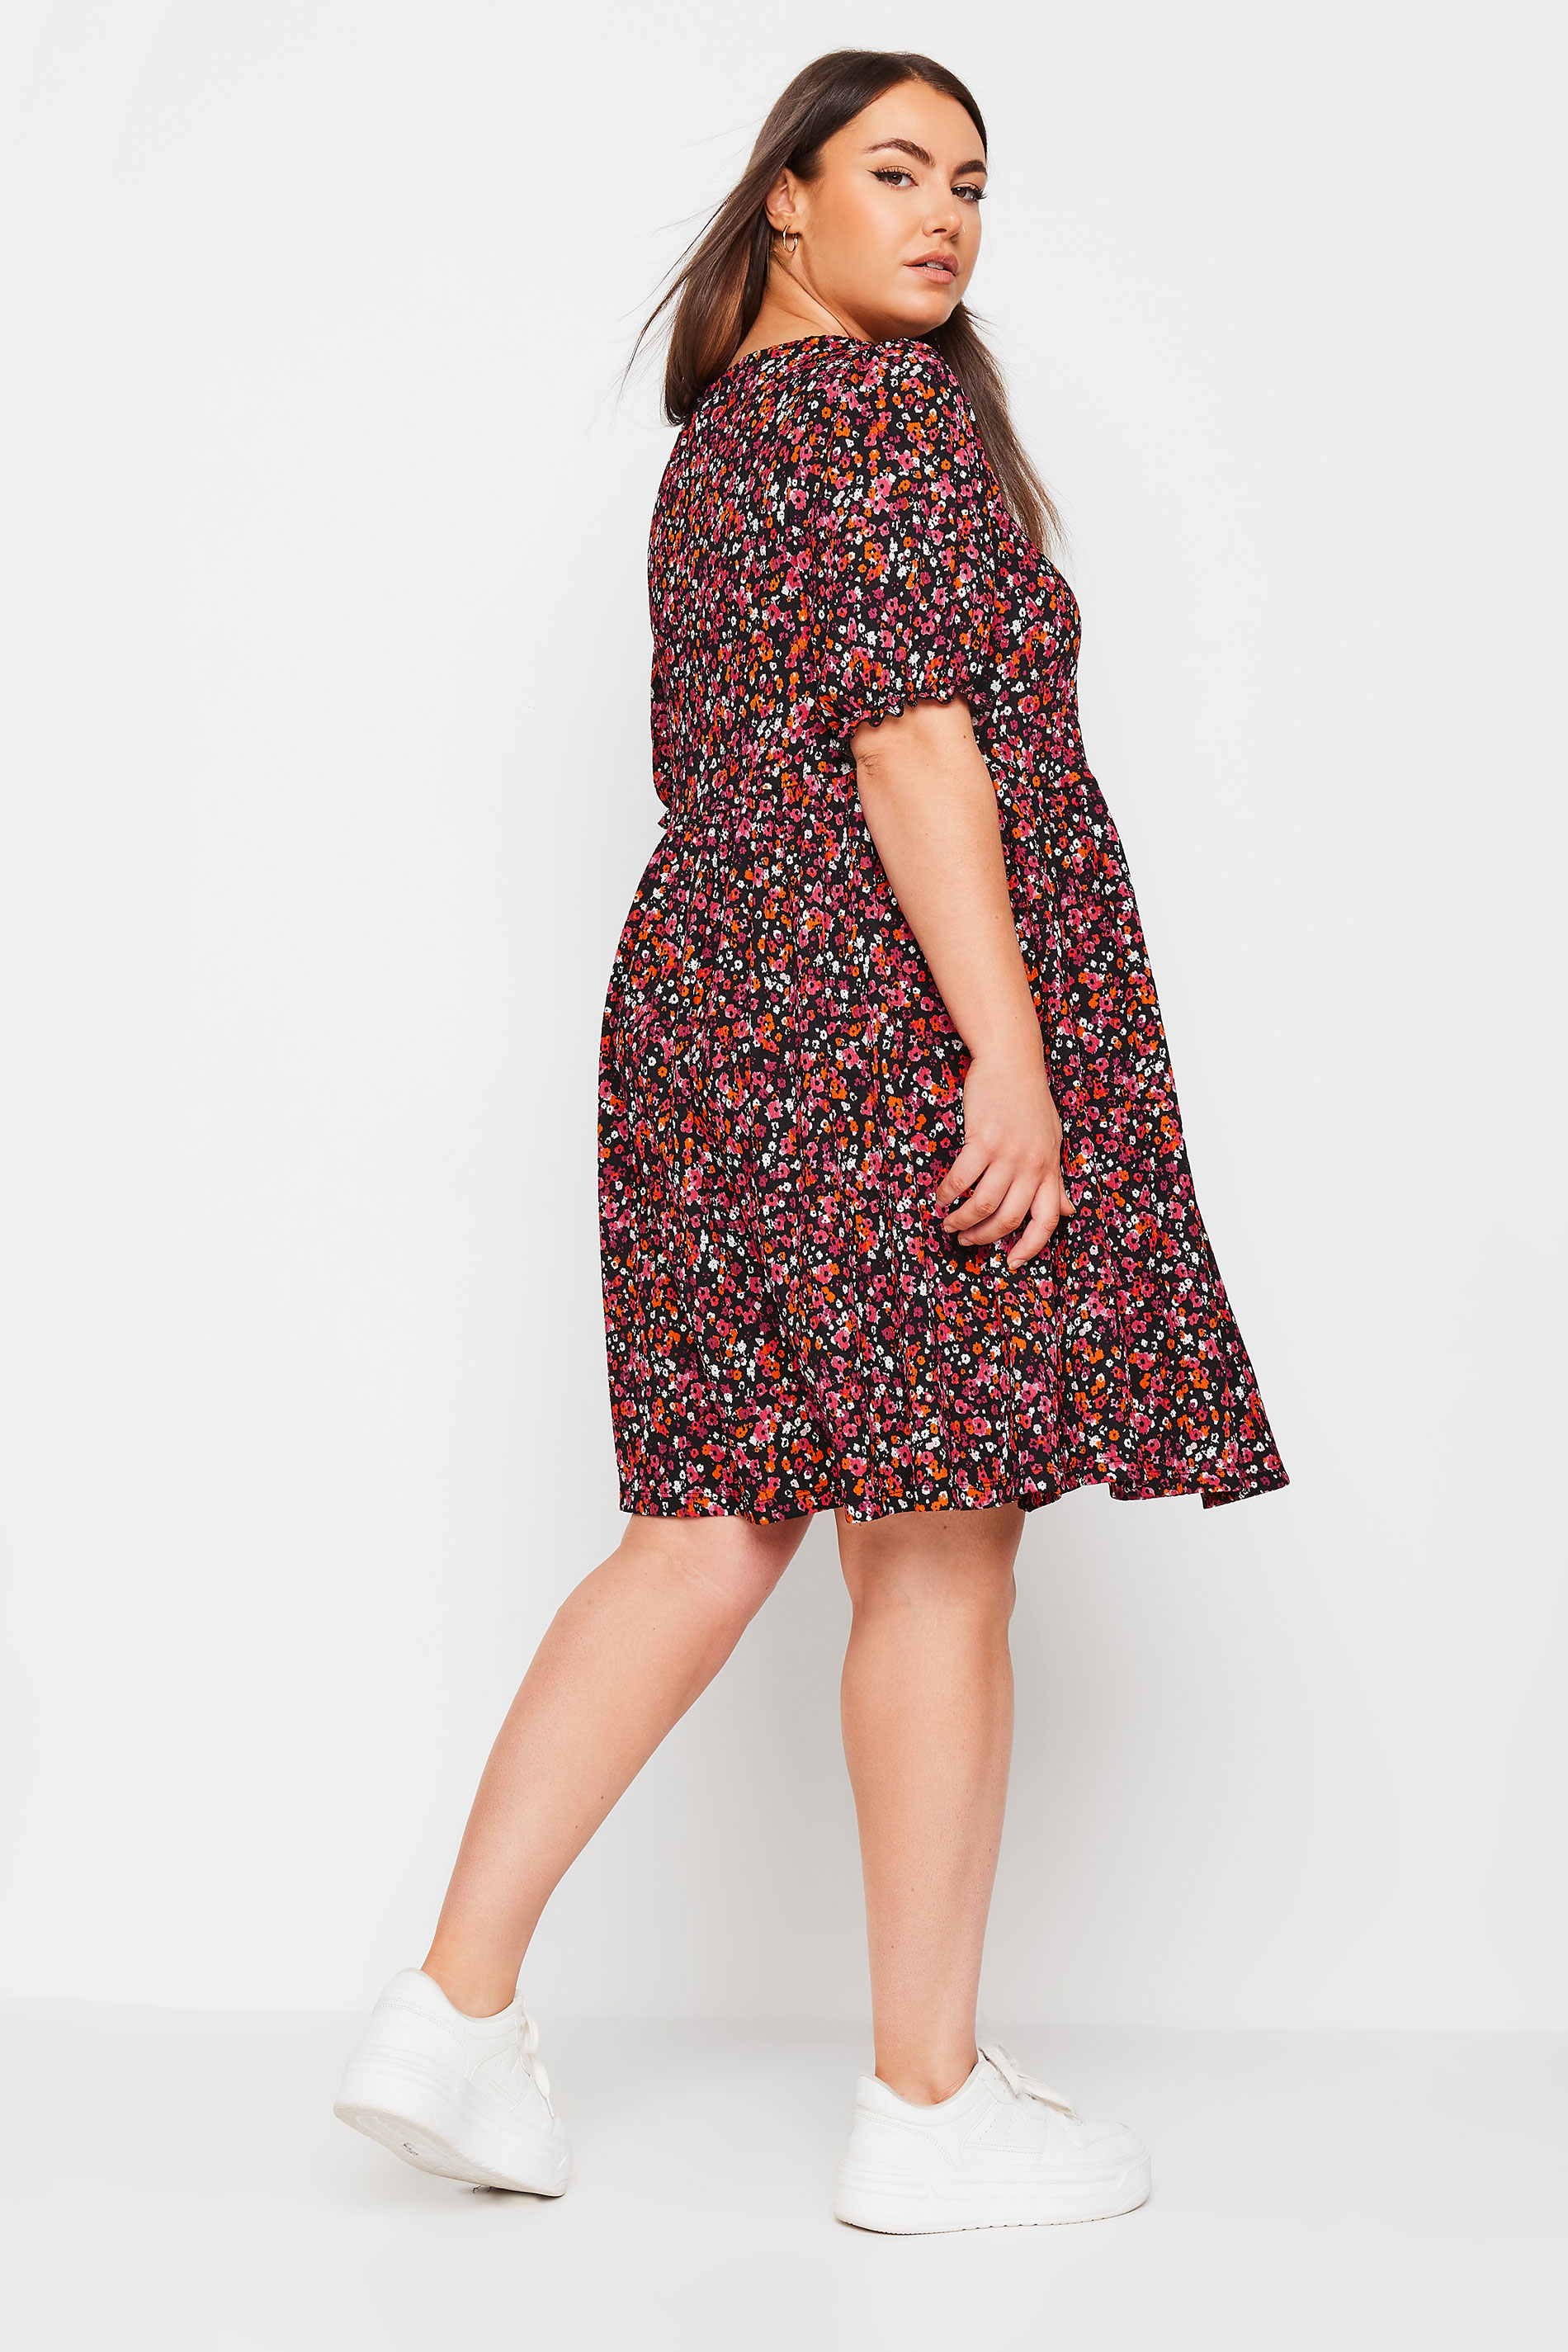 YOURS Plus Size Black Ditsy Floral Print Textured Smock Dress | Yours Clothing 3